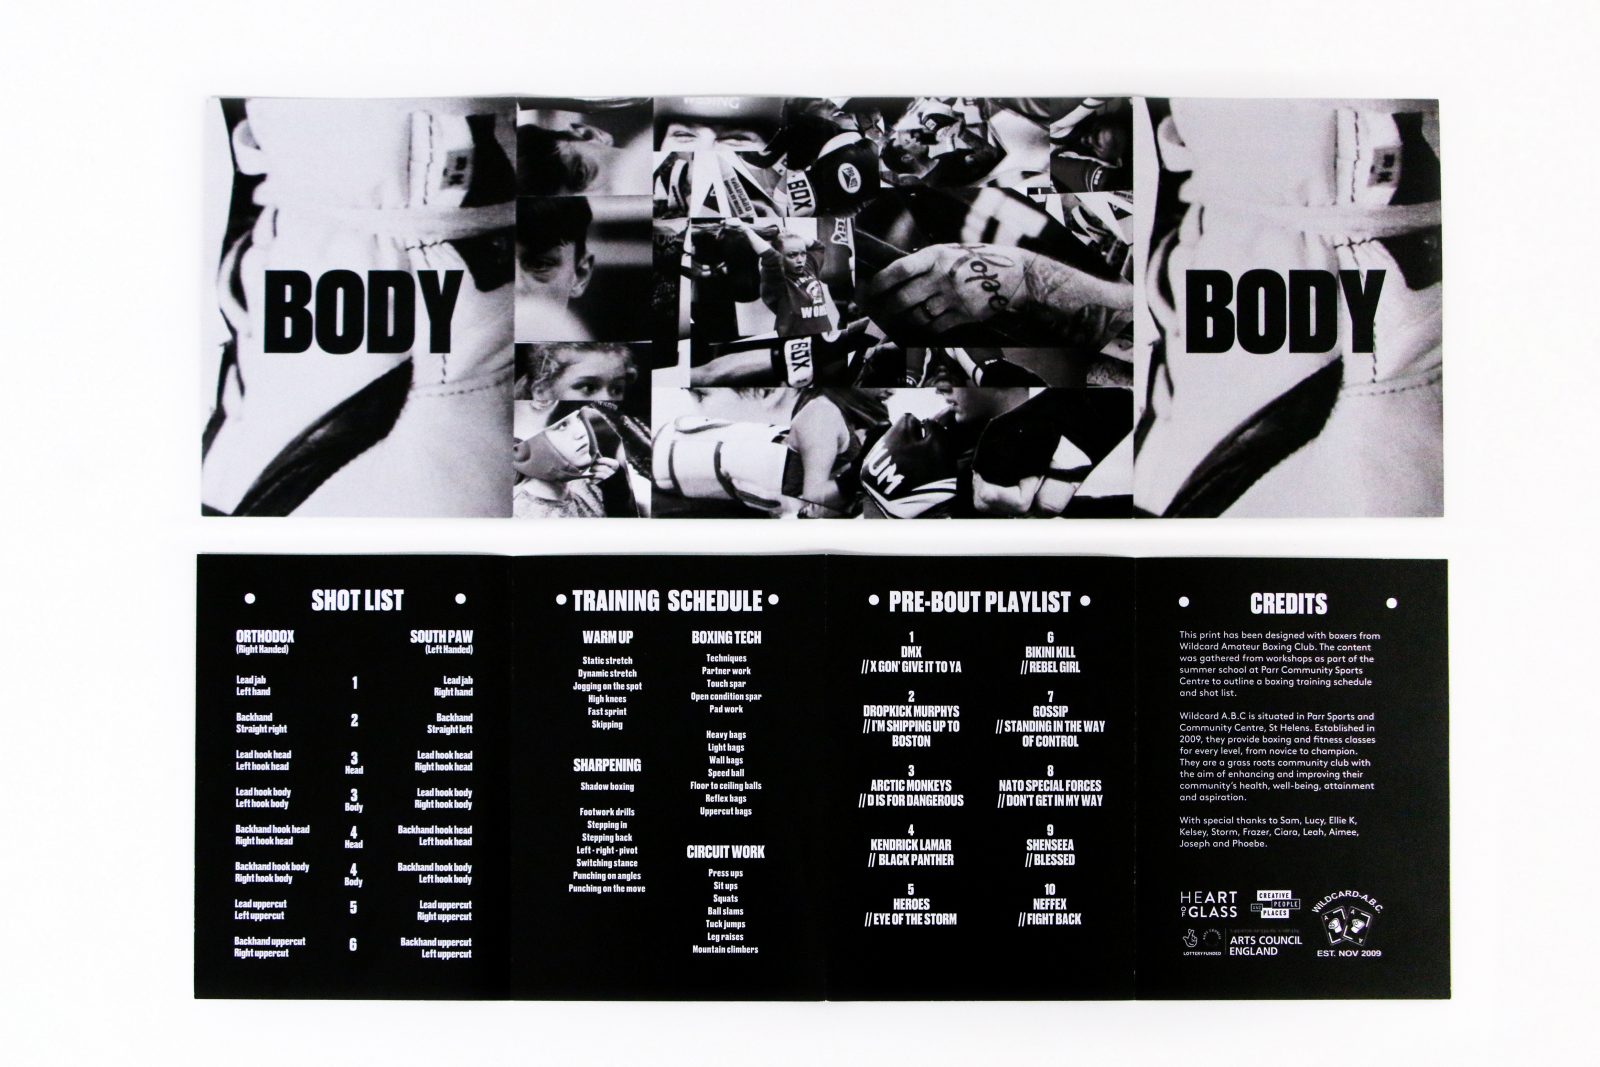 A black and white magazine spread image including a collage of faces and a large amount of text.